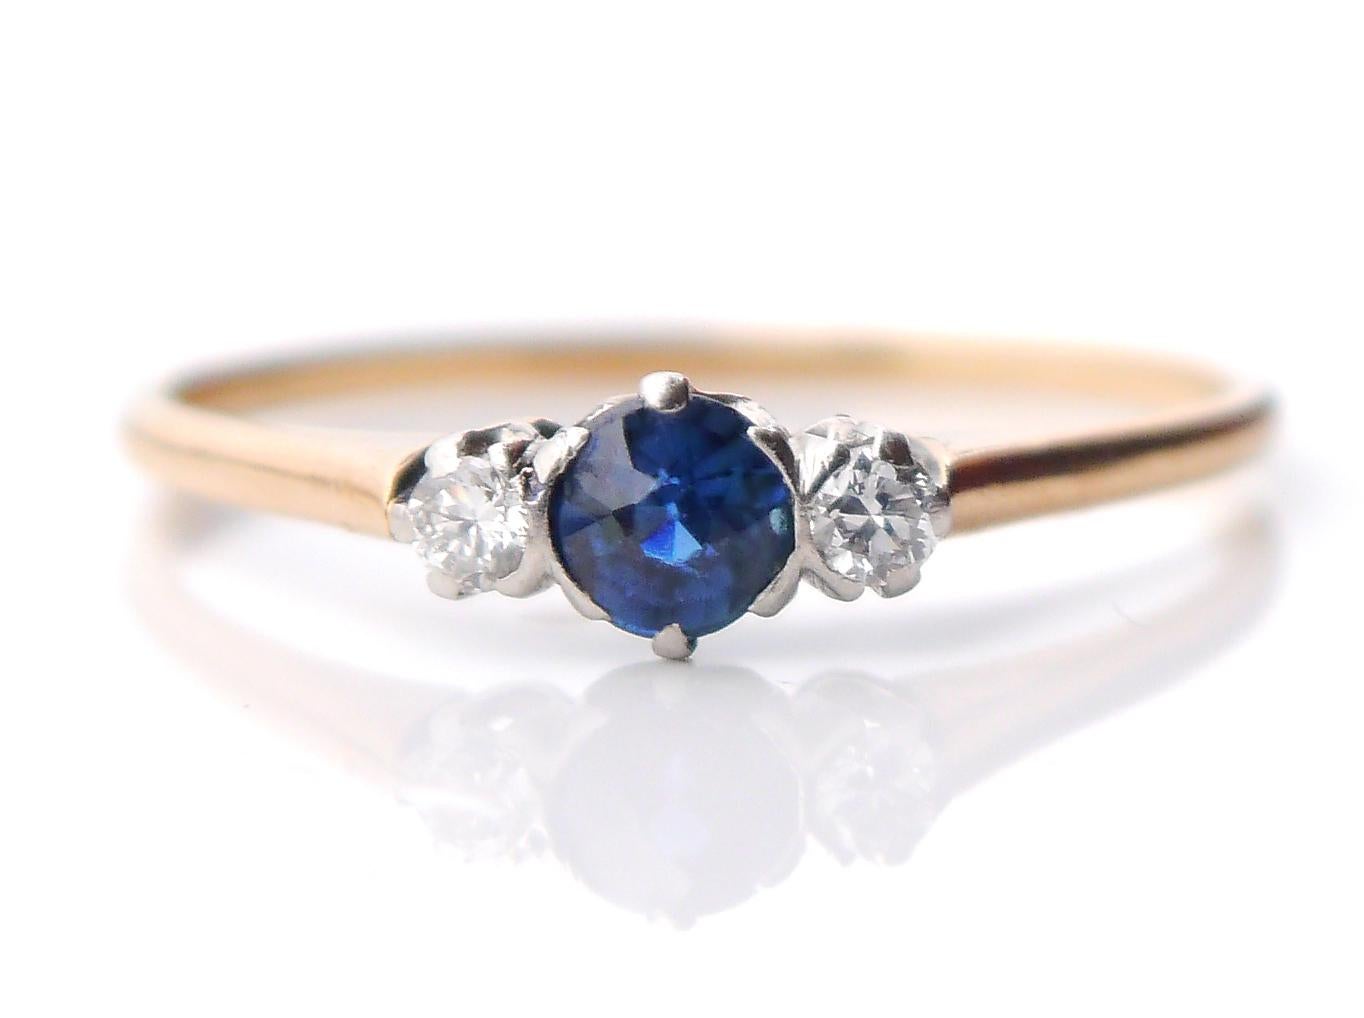 Art - Deco period Three - stone Ring , band in solid 18k Yellow Gold with platinum bezels set with natural Sapphire stone Ø 4.25 mm x 2.75 mm / ca. 0.45ct and 2 old diamond cut Diamonds Ø 2.5 mm / ca.0.08 ct each. All with open backs.
Swedish ring,